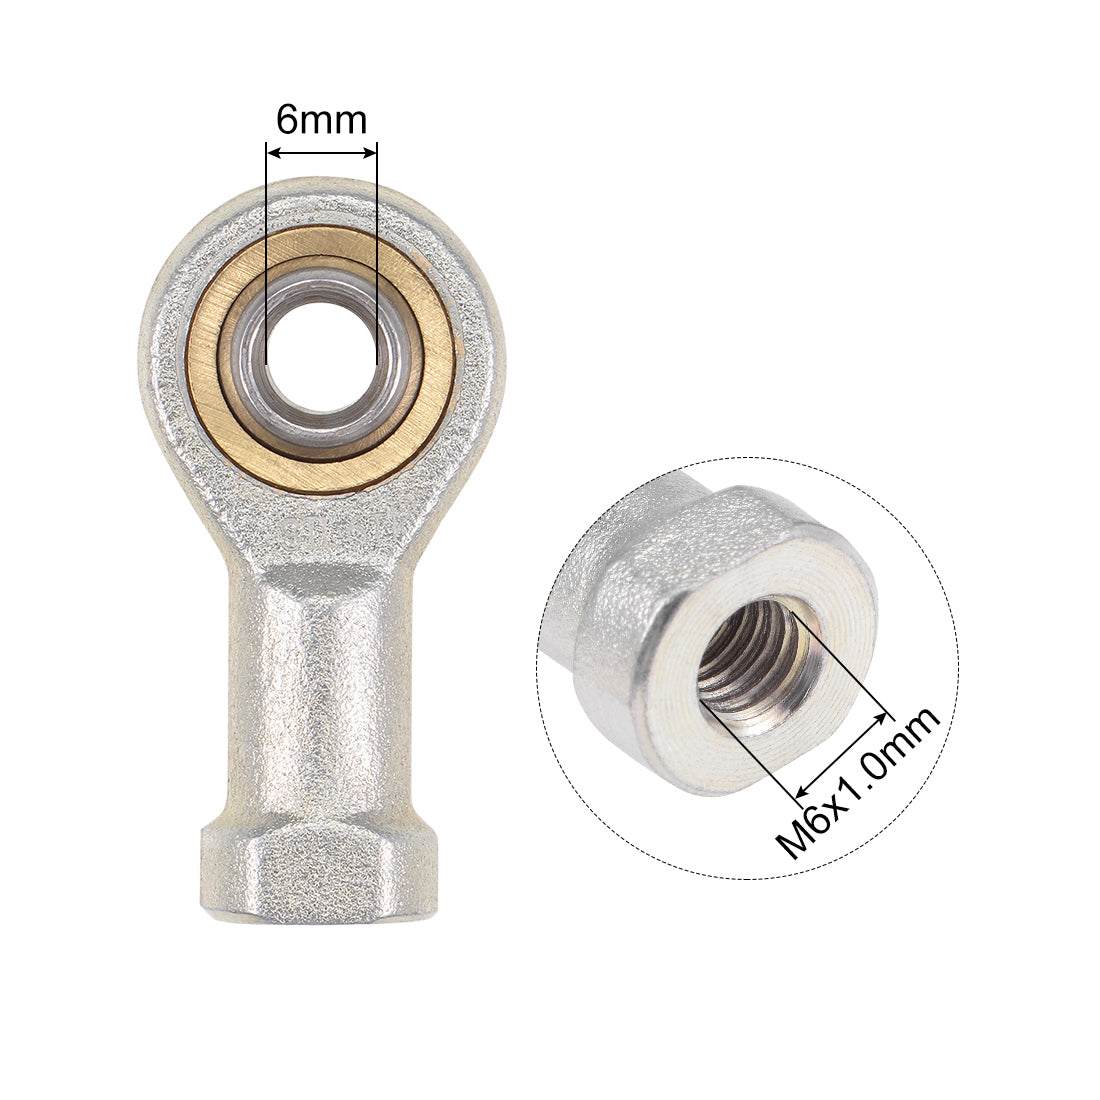 uxcell Uxcell 6mm Rod End Bearing M6x1.0mm Rod Ends Ball Joint Female Right Hand Thread 2pcs